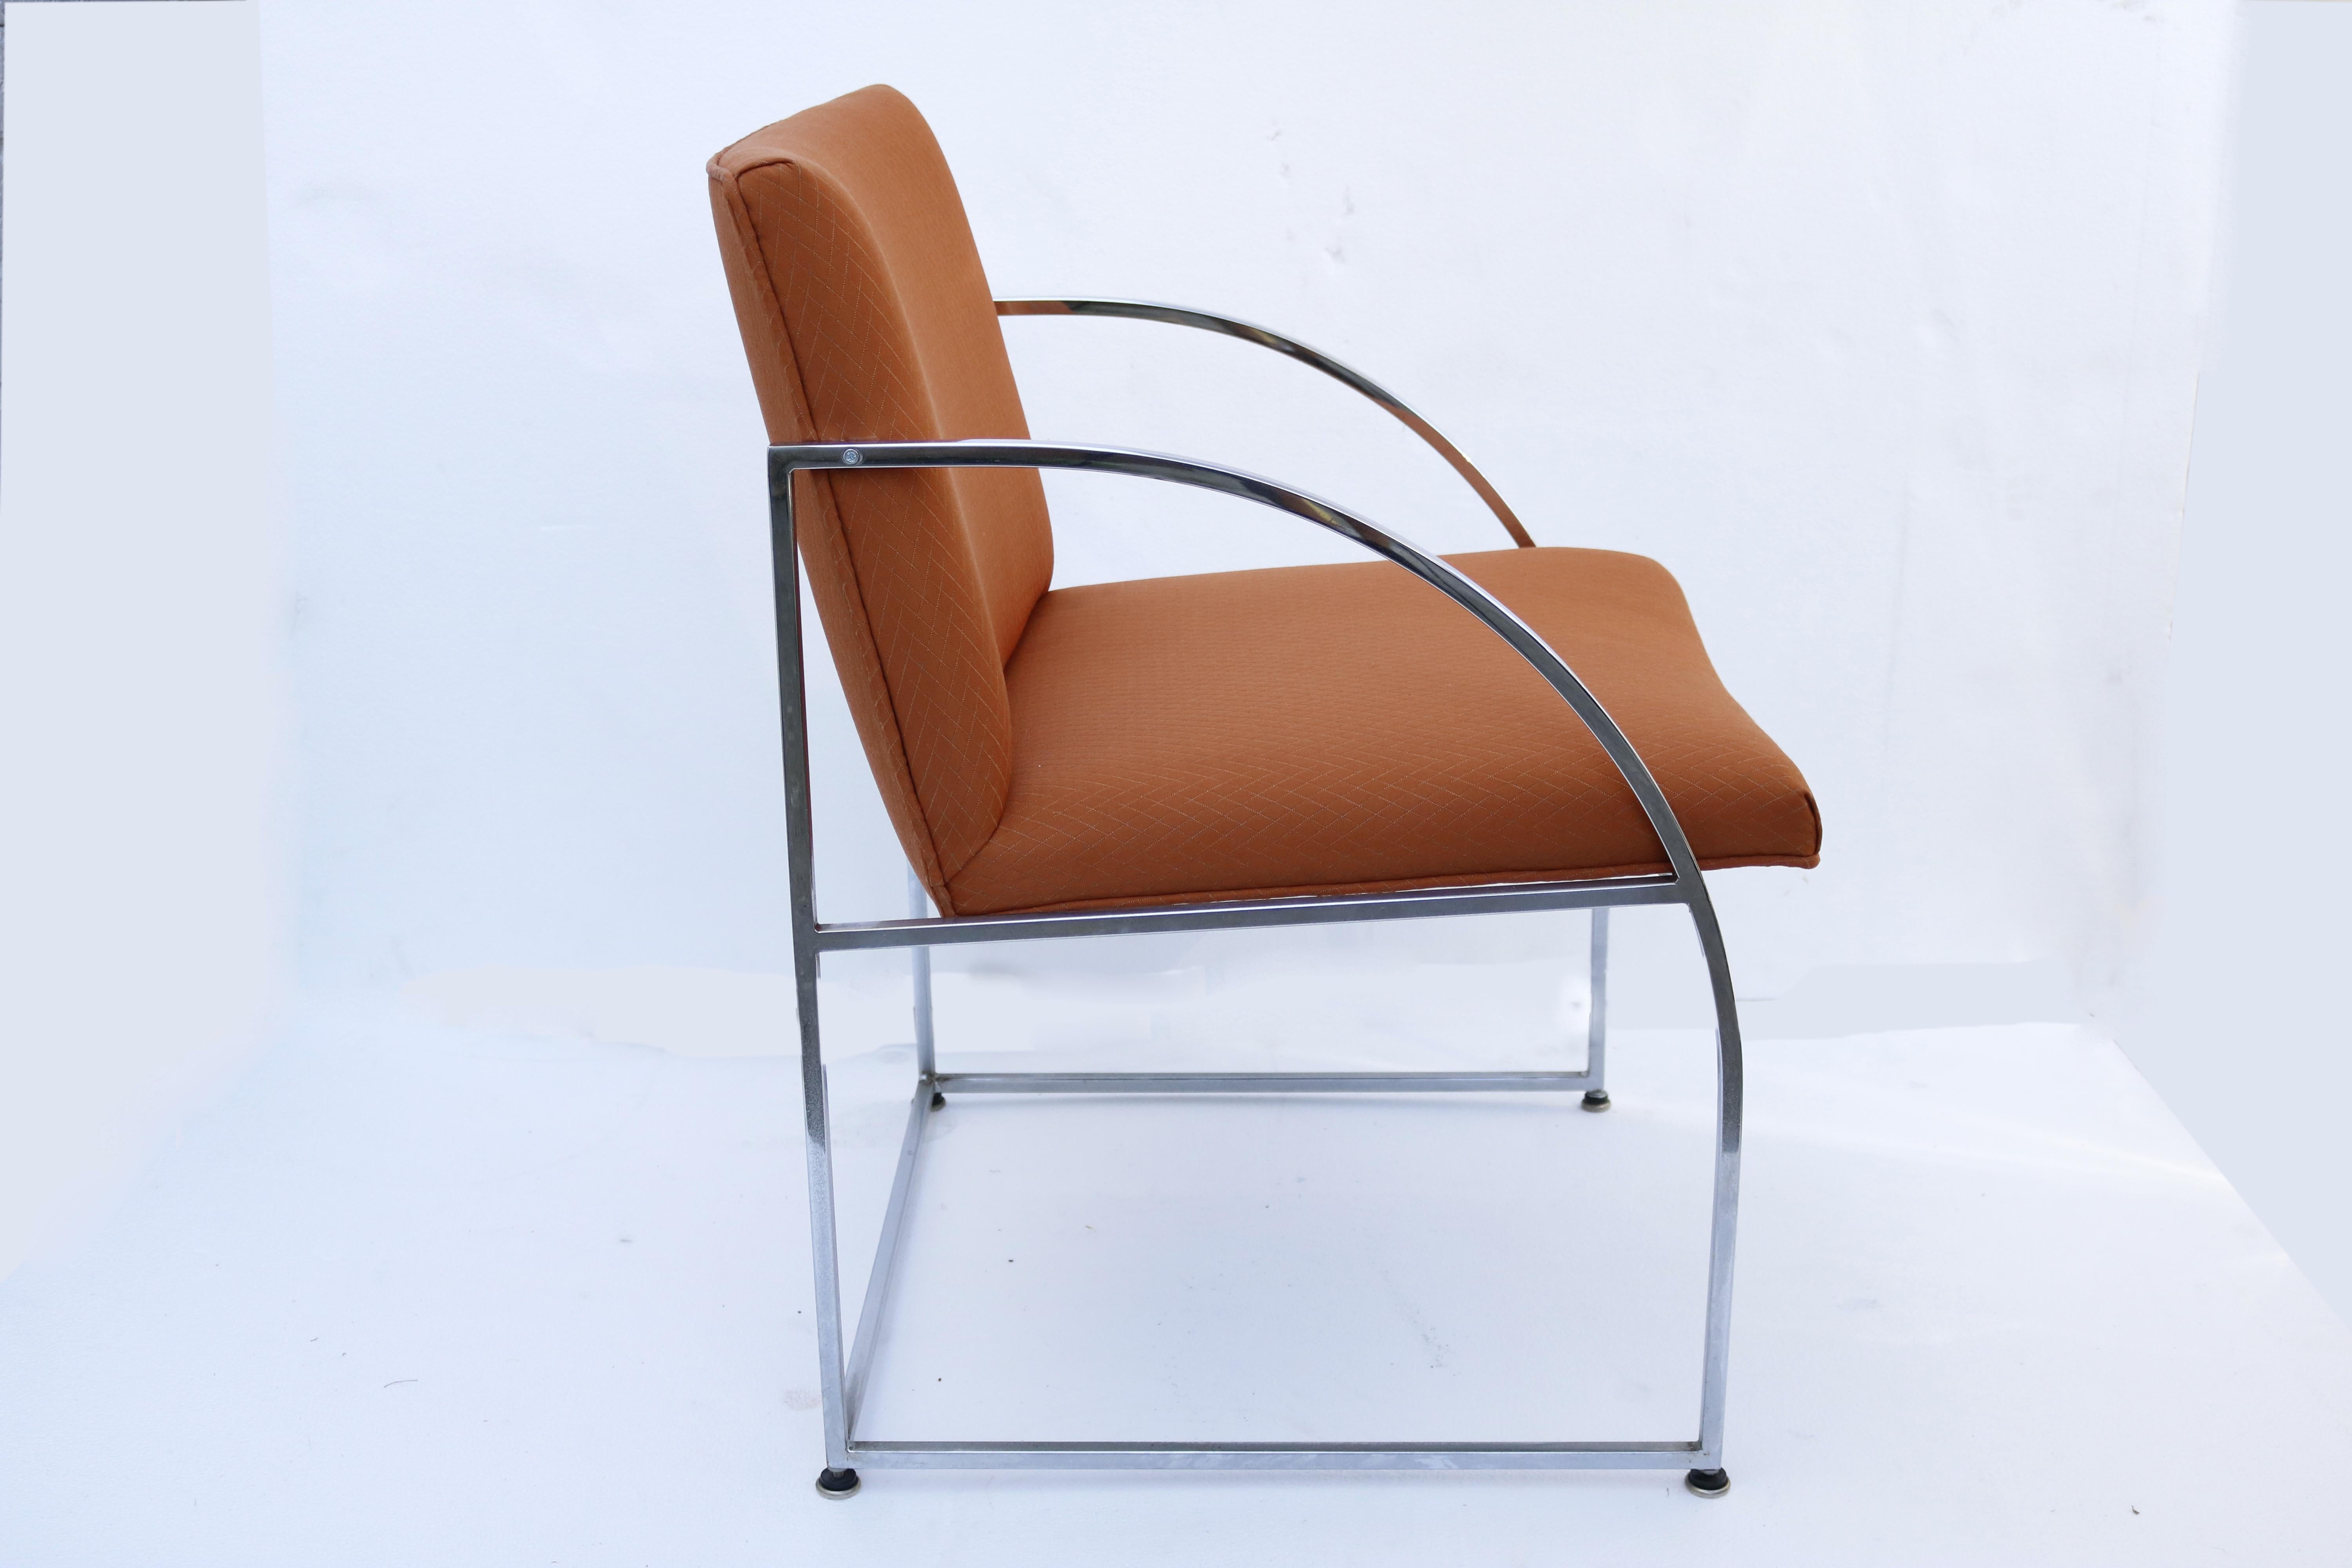 Architectural design chairs by Milo Baughman, framed in chrome and cushioned in summertime-rust/orange fabric.